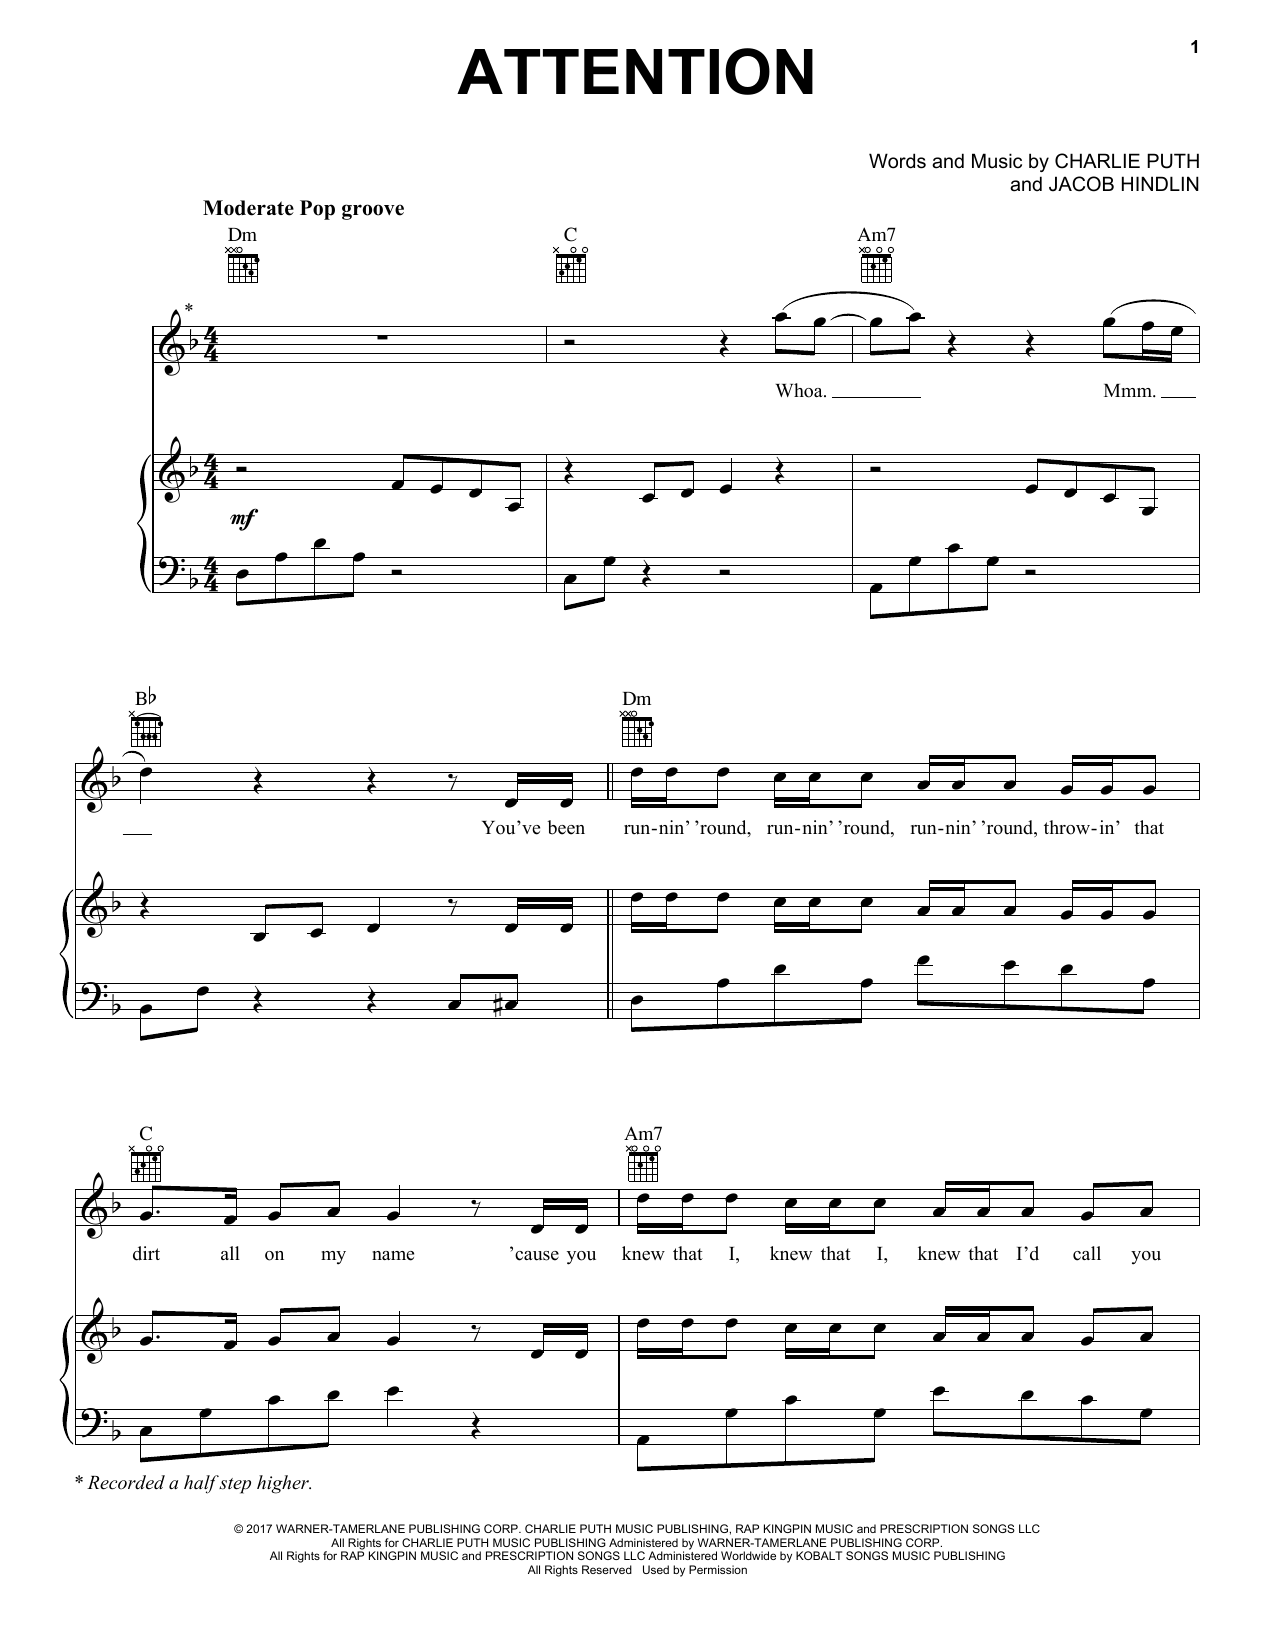 Download Charlie Puth Attention Sheet Music